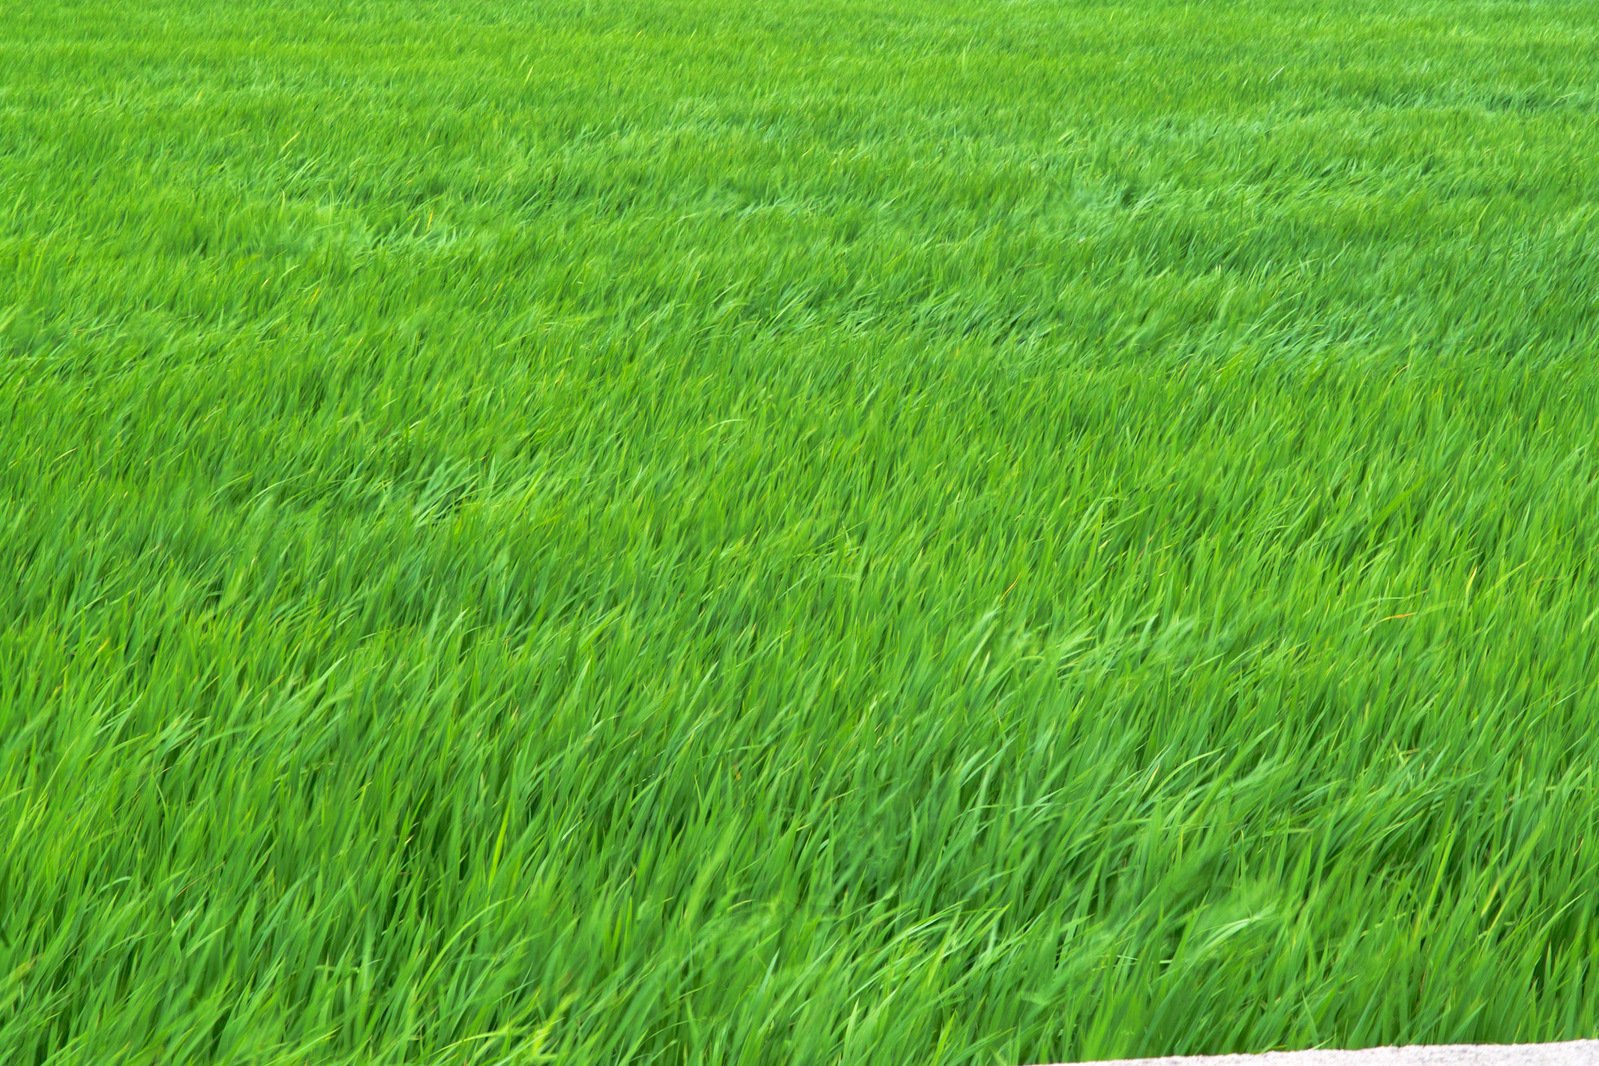 a view of a large field of green grass